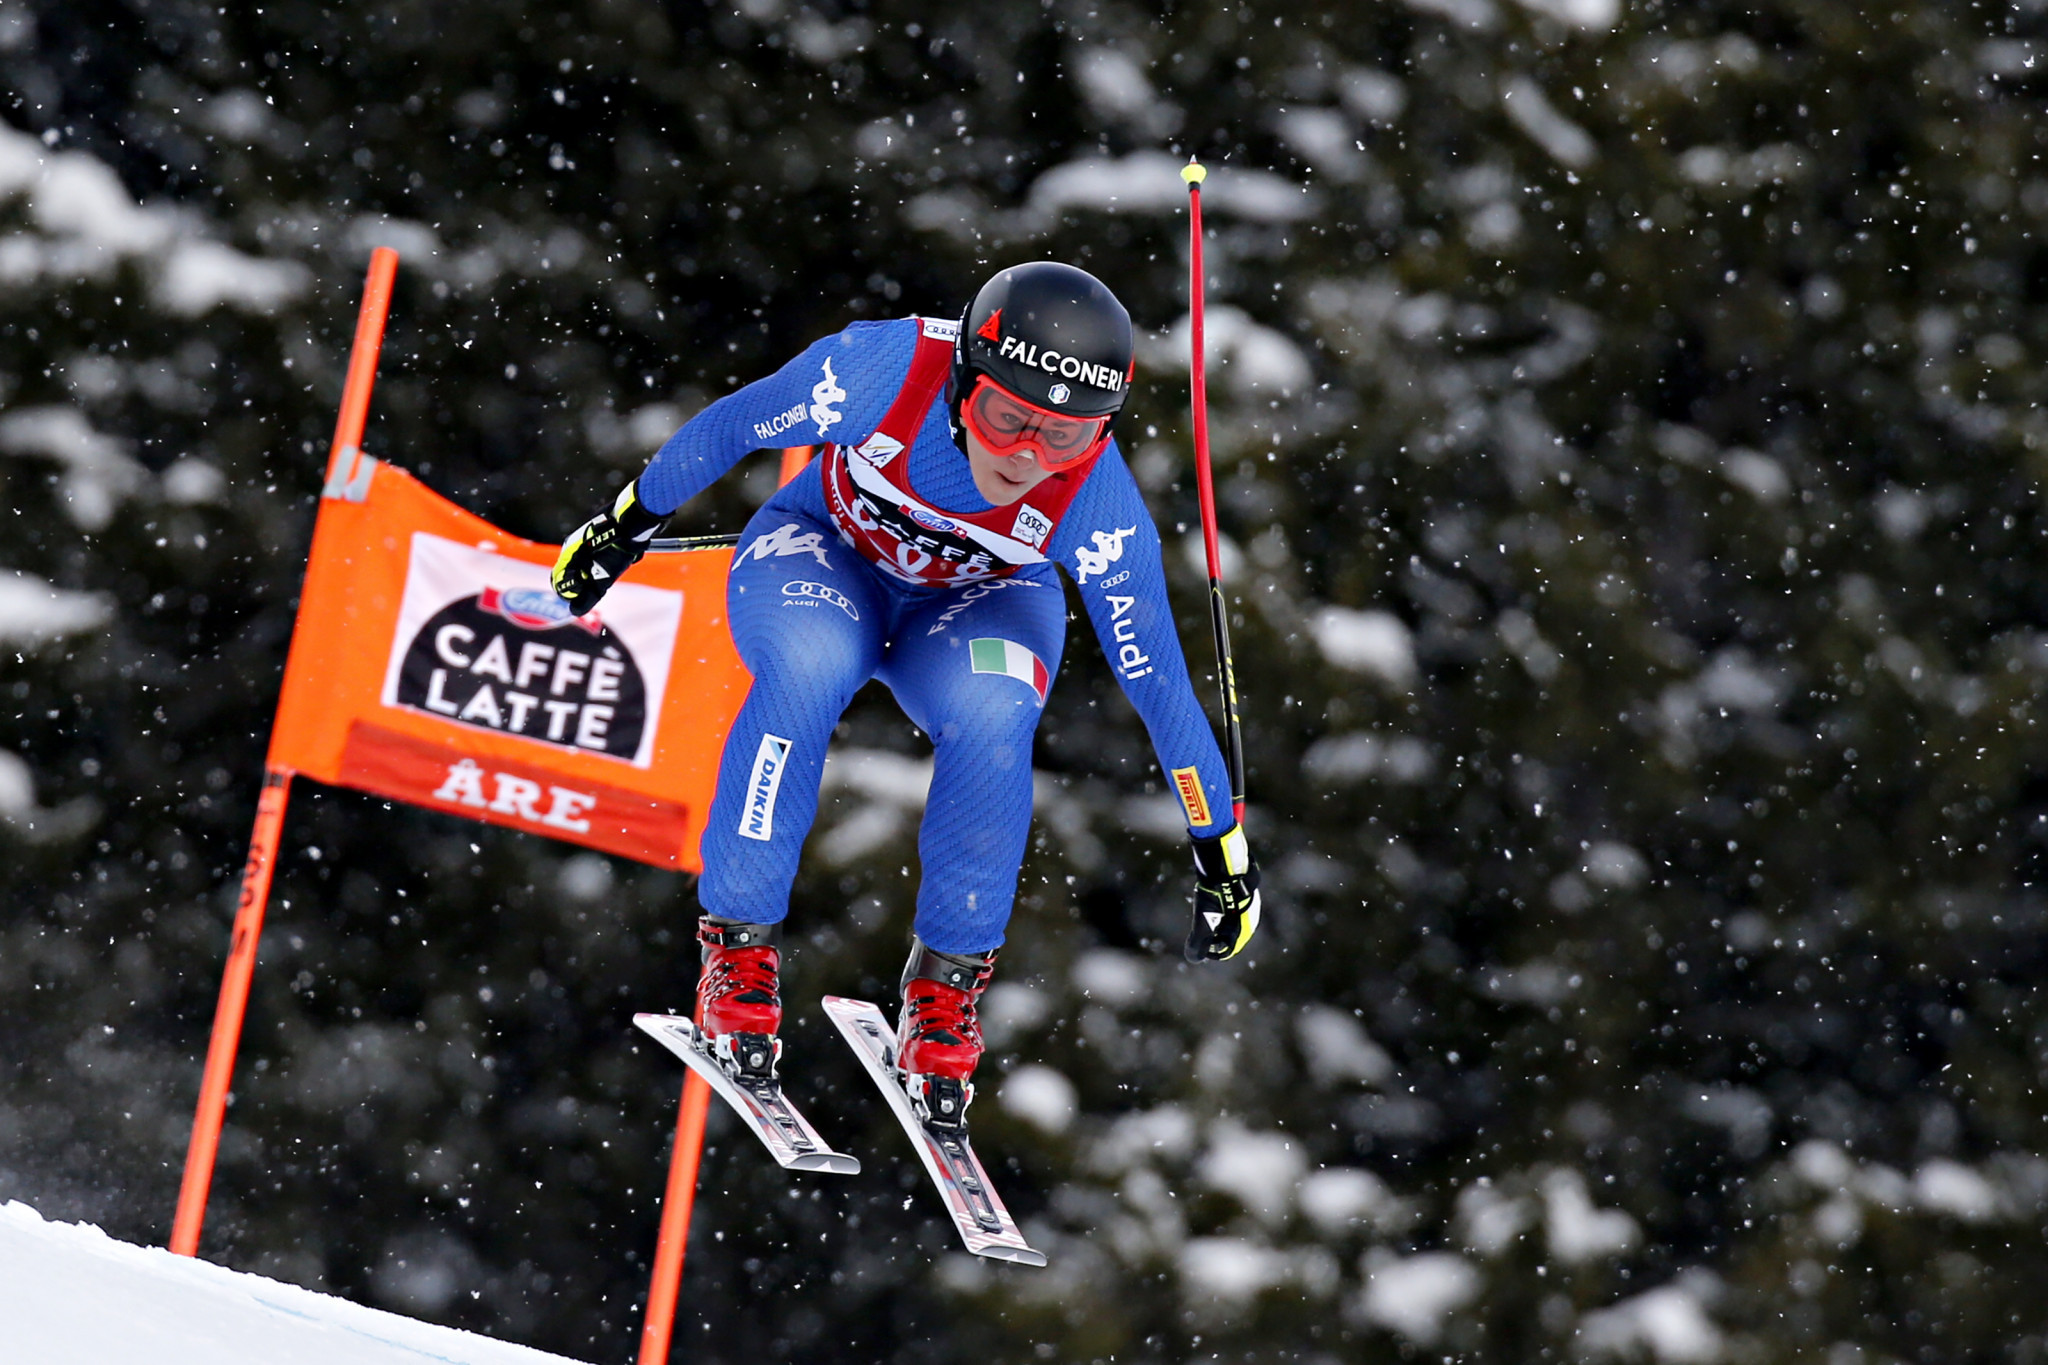 Italy's Sofia Goggia did enough to seal the overall downhill crown after finishing second in the women's race ©Getty Images